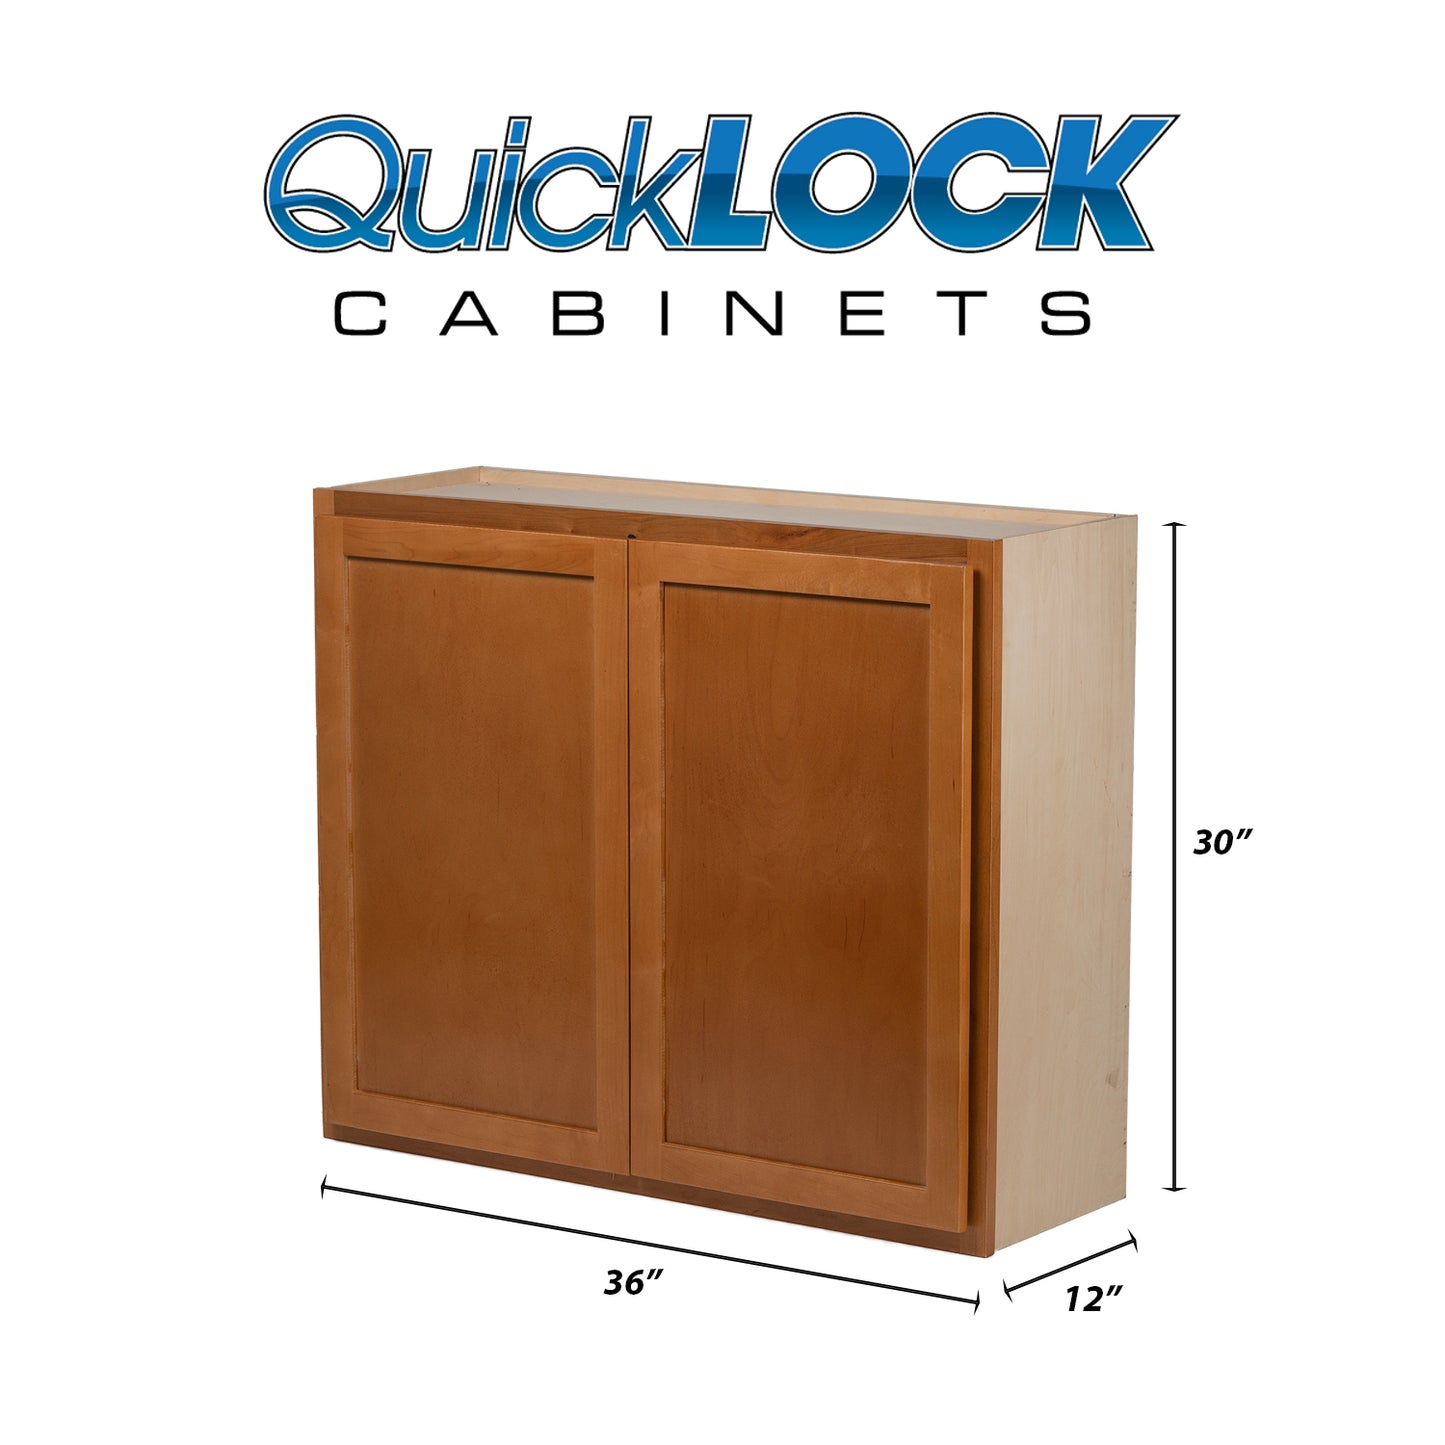 Quicklock RTA (Ready-to-Assemble) Provincial Stain 36"Wx30"Hx12"D Wall Cabinet